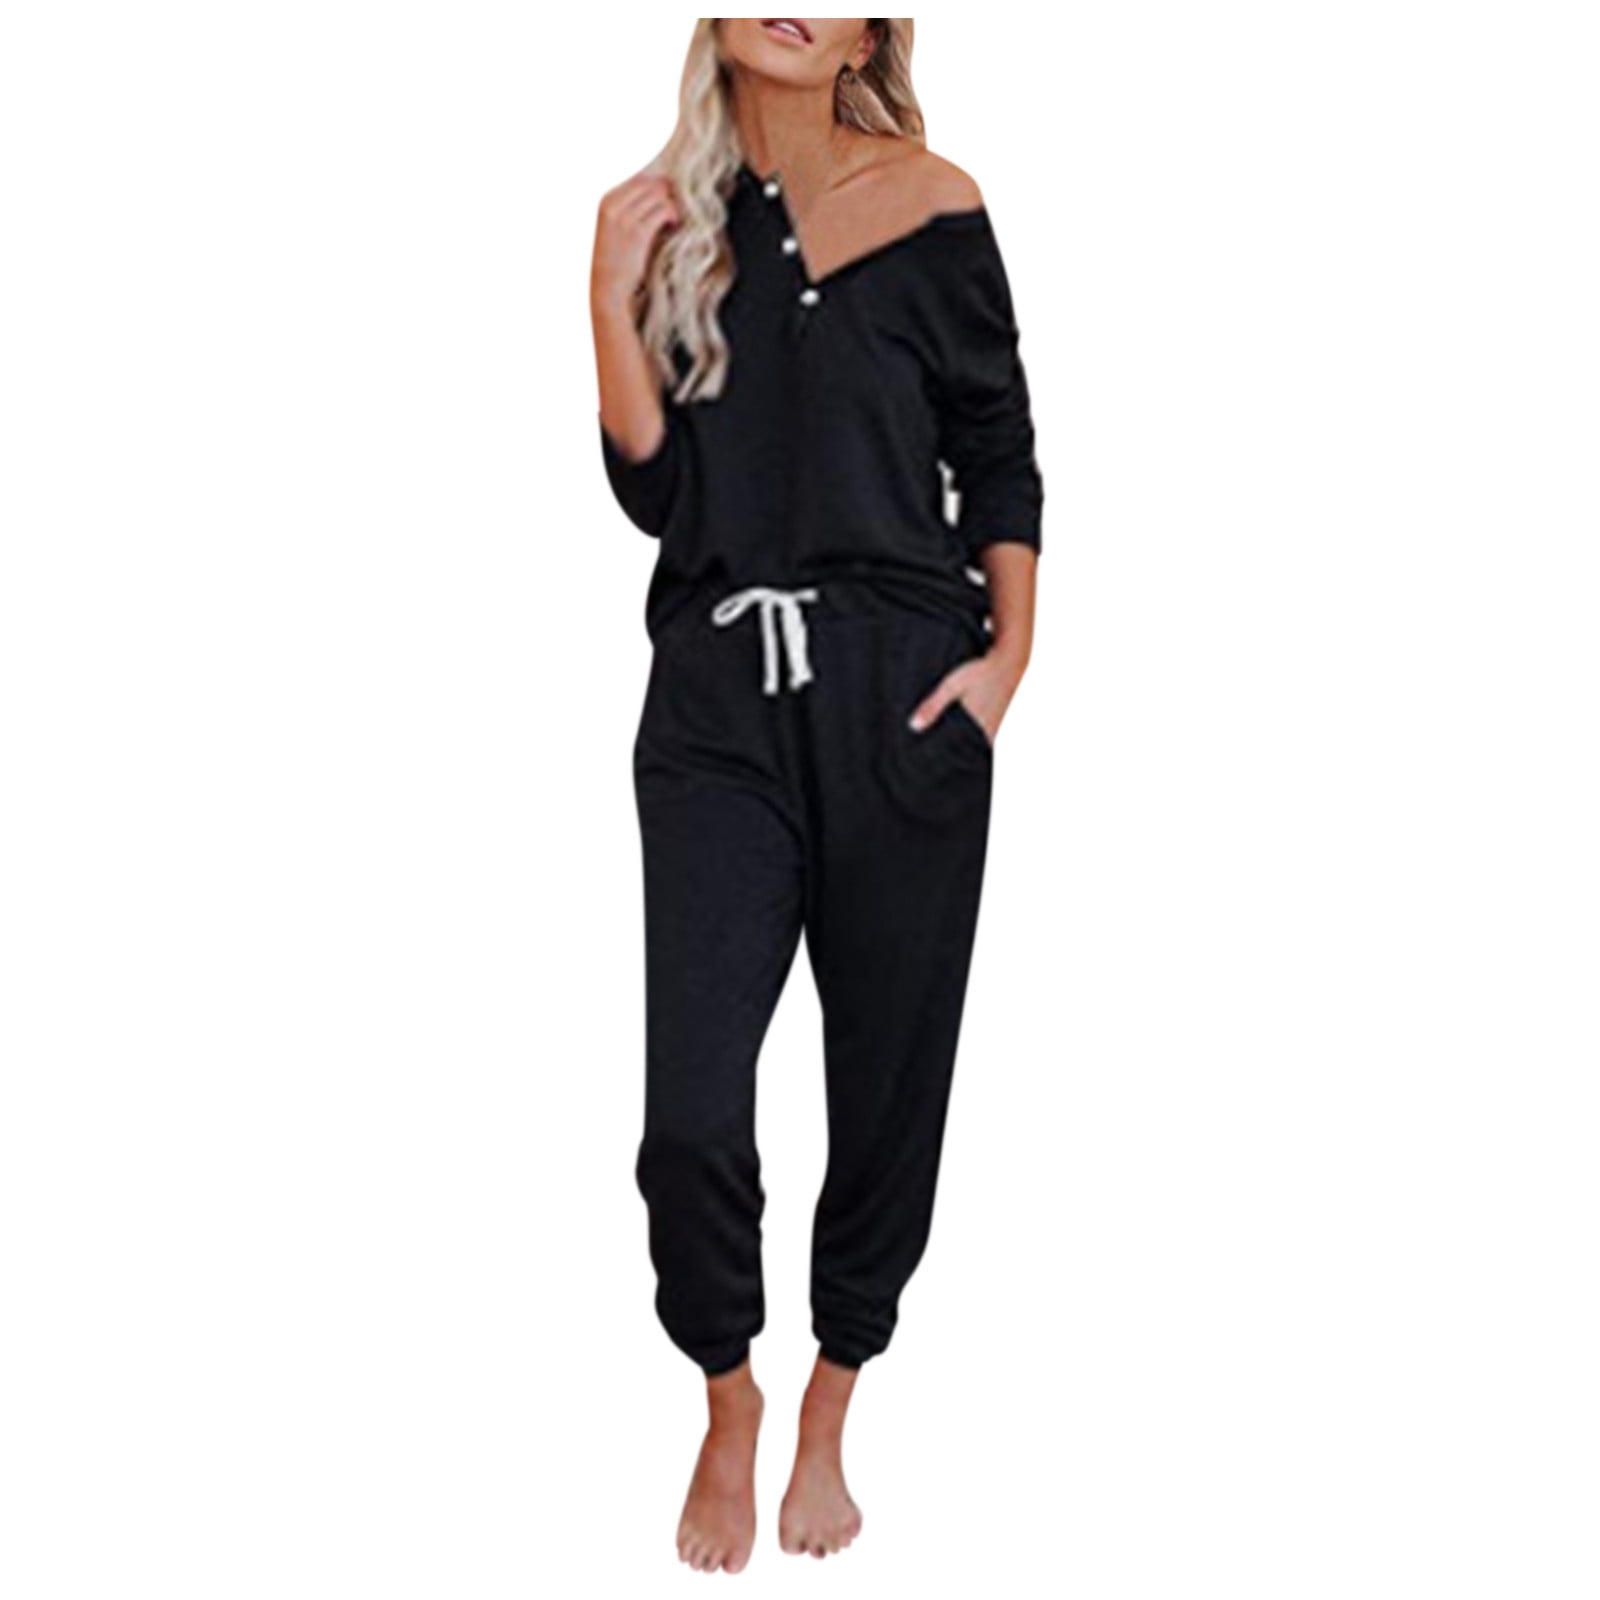 WIHOLL Two Piece Outfits for Women Lounge Sets Button Down Sweatshirt Sweatpants Sweatsuits Set with Pockets 